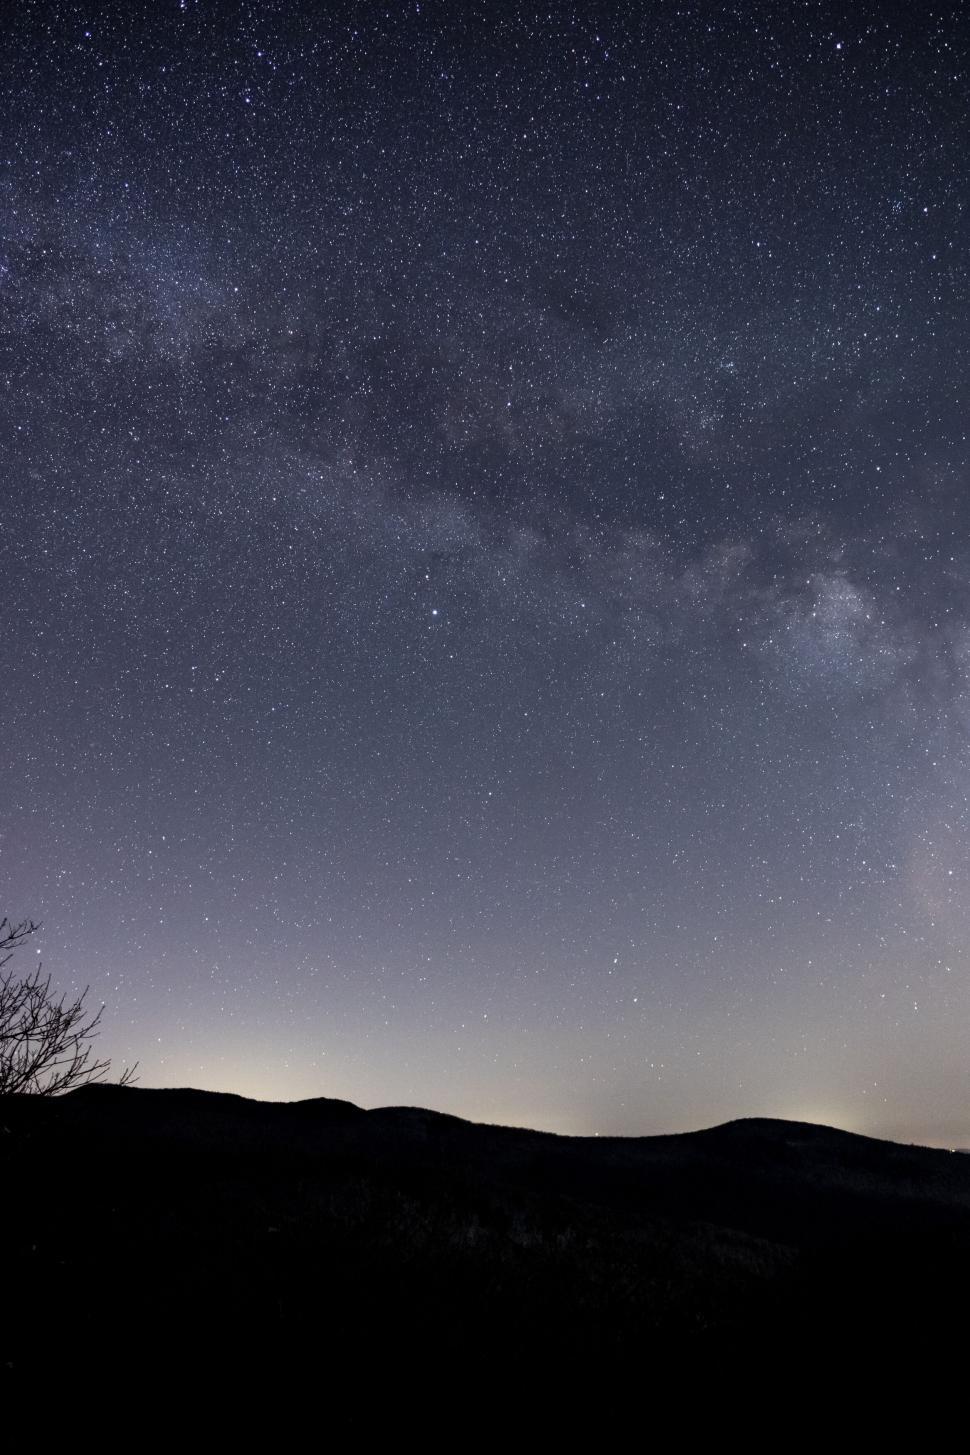 Free Image of Stars twinkling in the night sky over mountains 